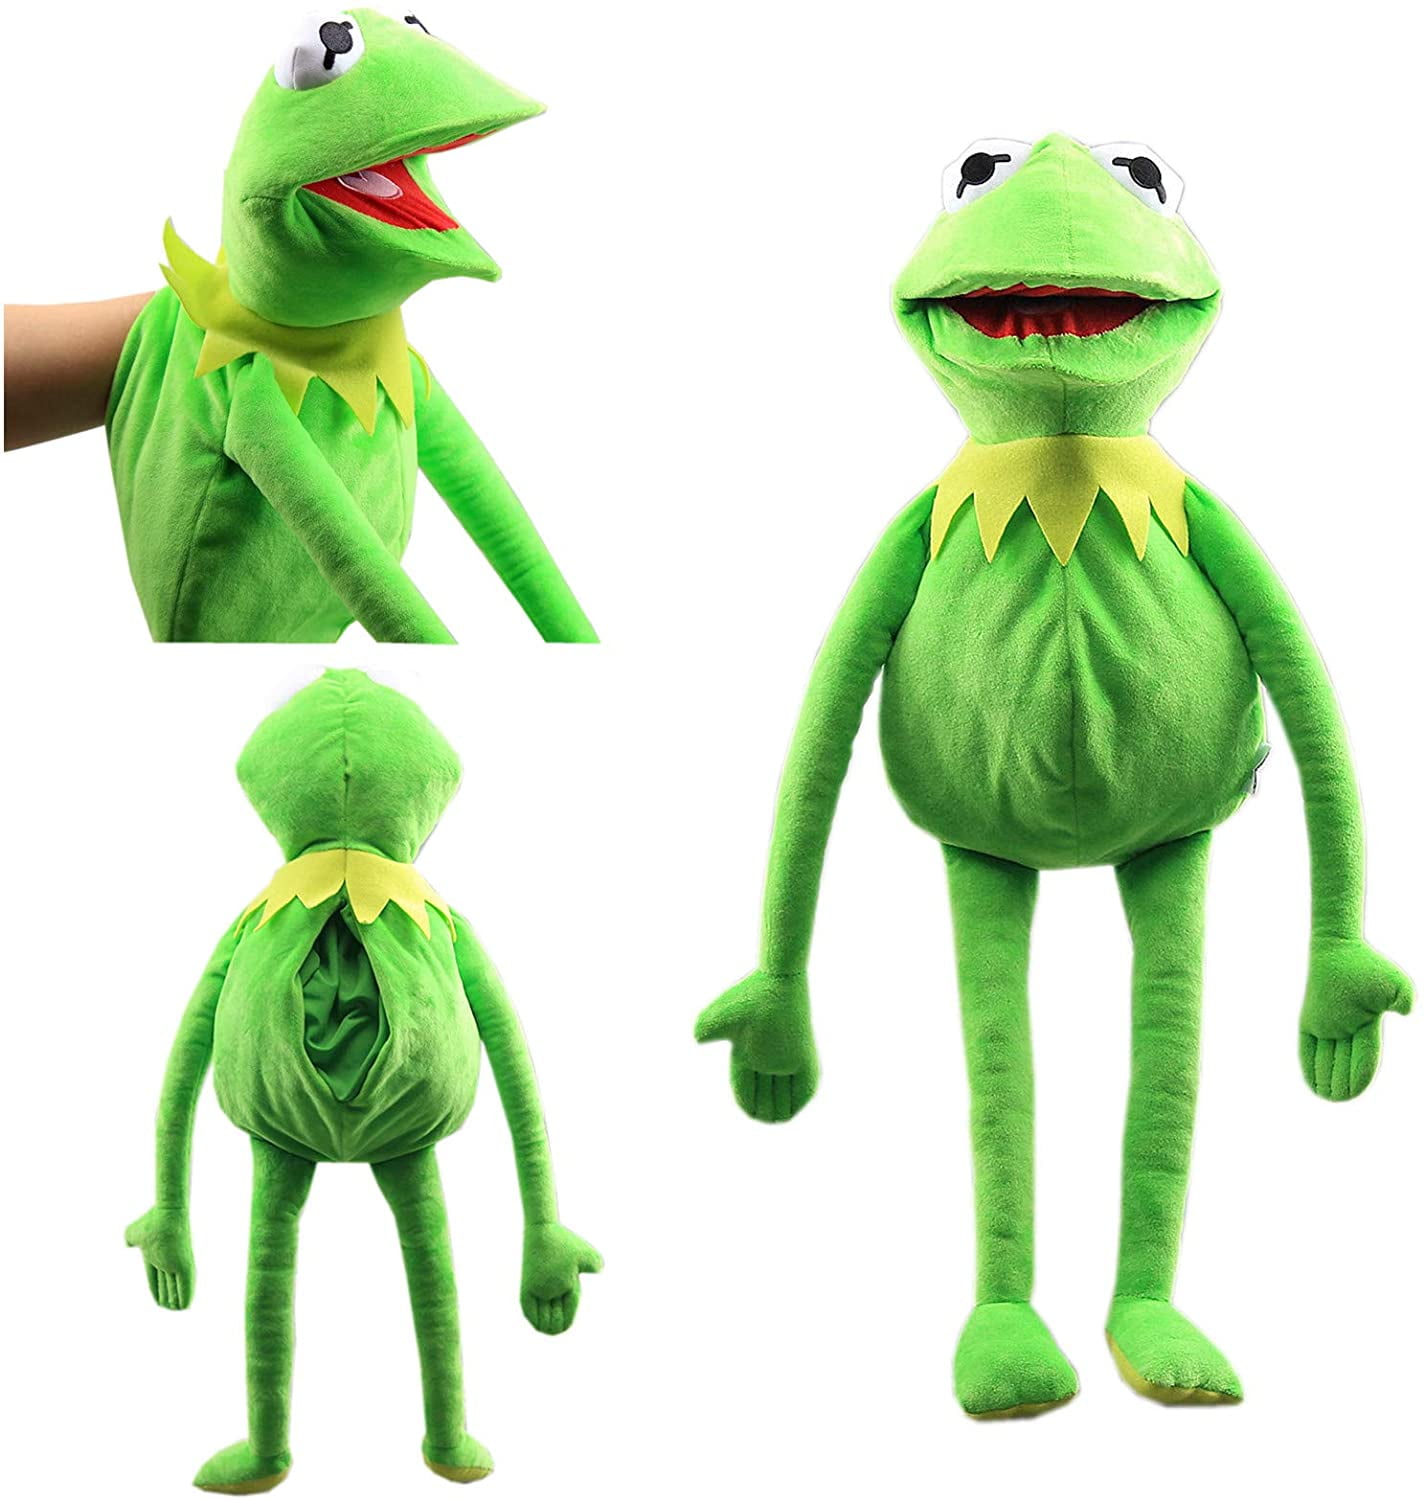 Muppet Show Series 1 Kermit The Frog Action Figure for sale online 